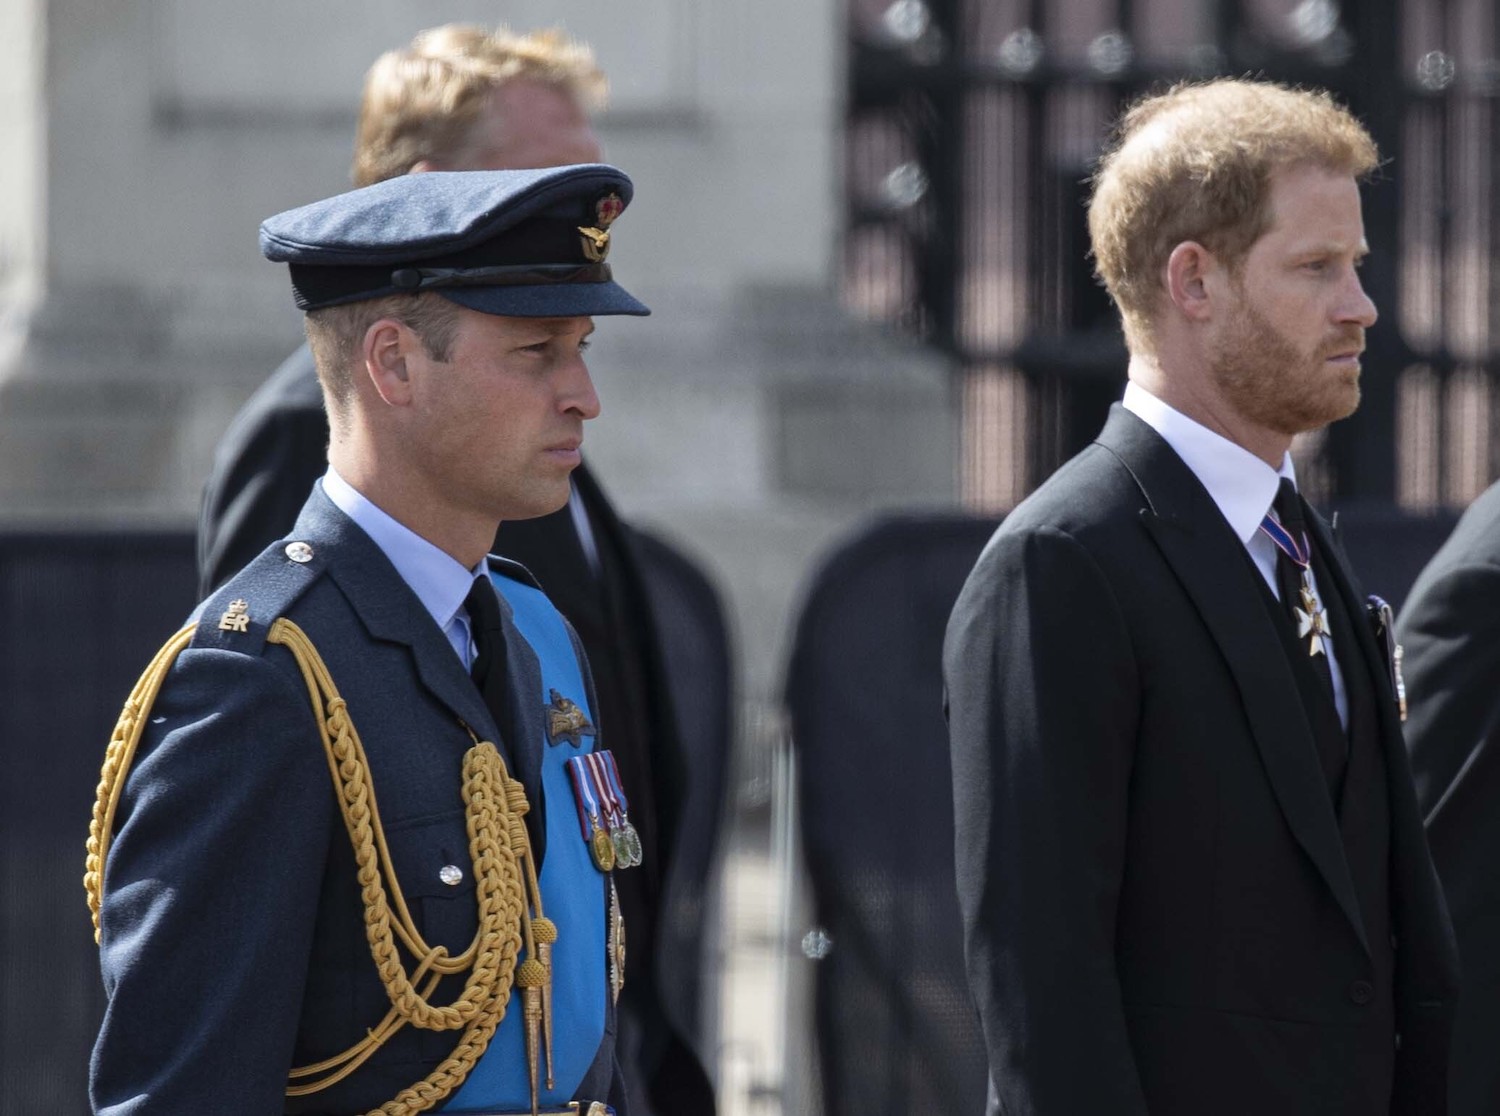 Prince William and Prince Harry walk behind Queen Elizabeth's coffin on the way to Westminster Hall